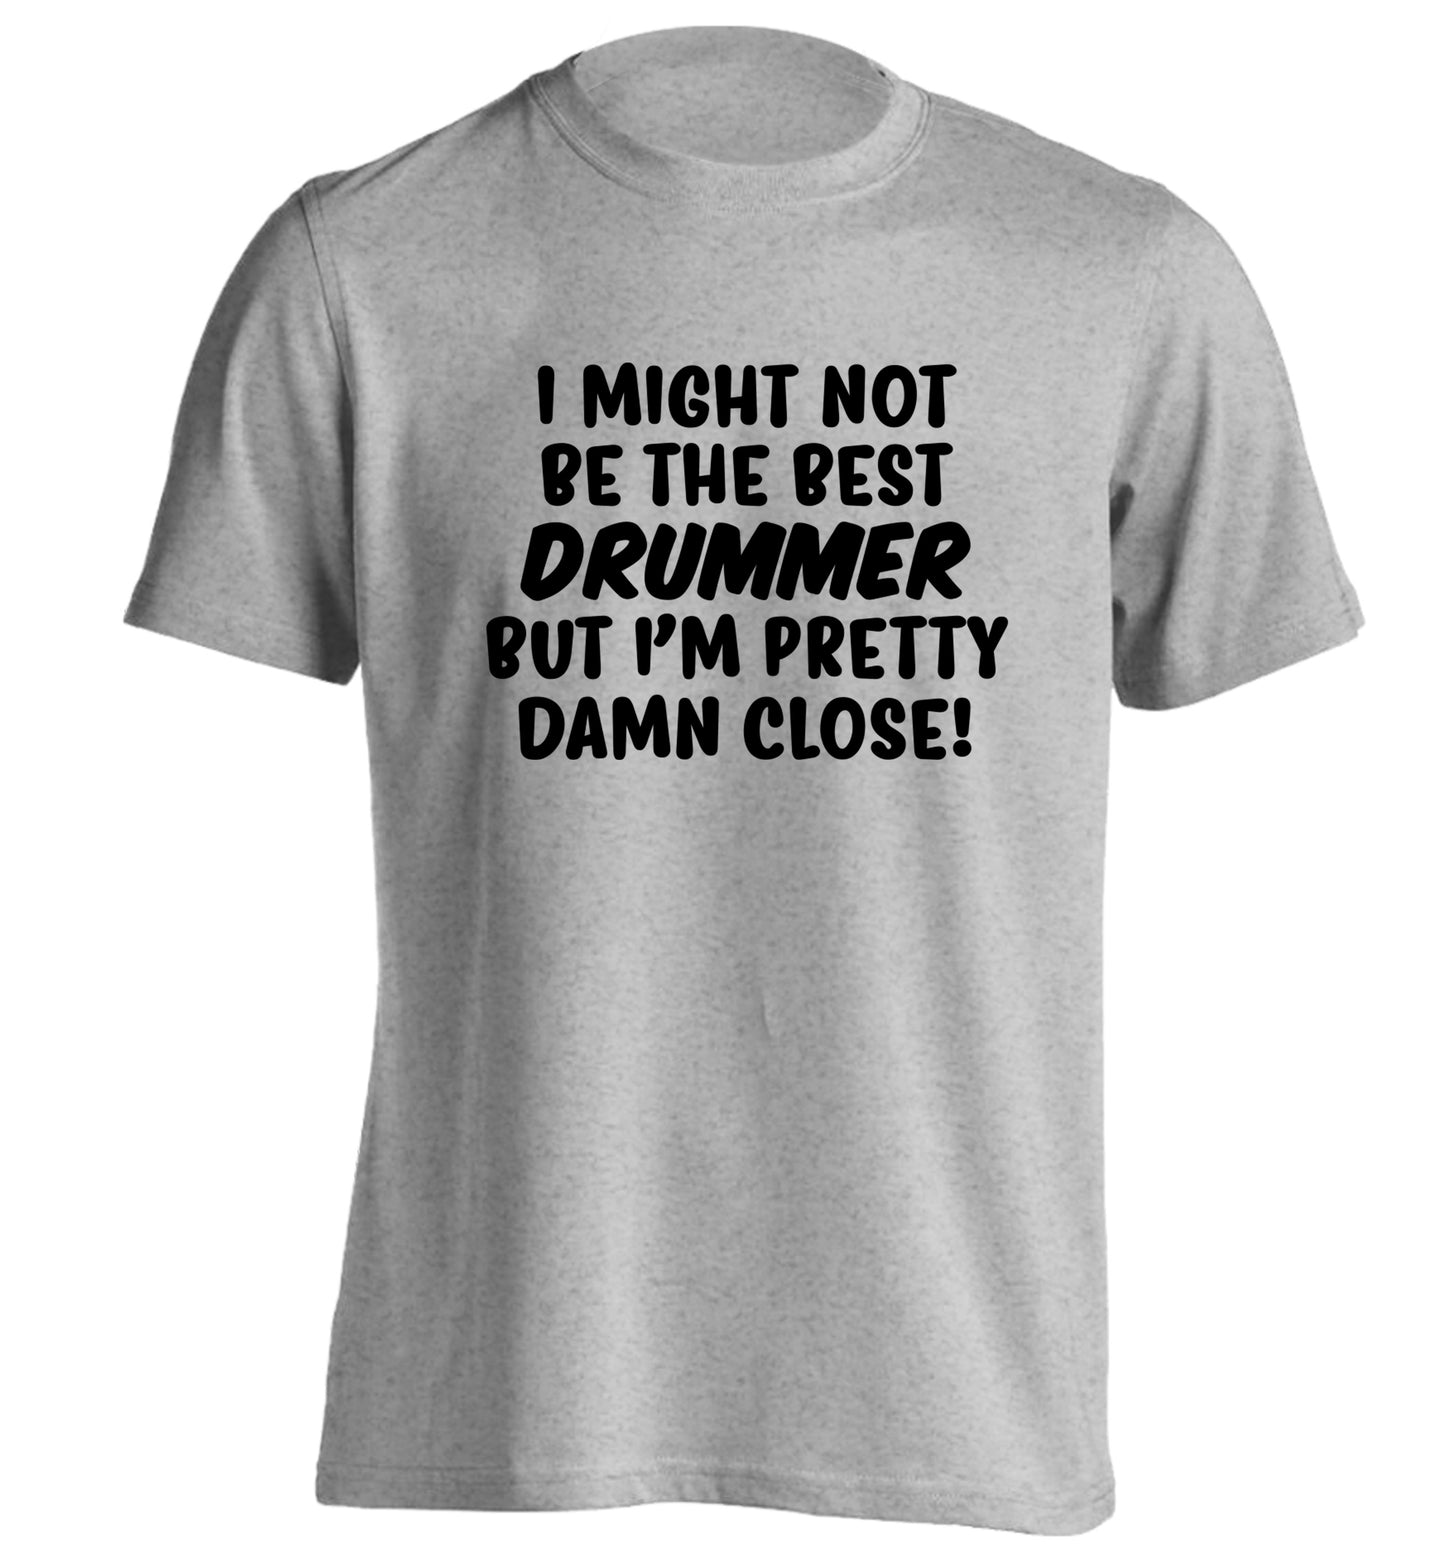 I might not be the best drummer but I'm pretty close! adults unisexgrey Tshirt 2XL